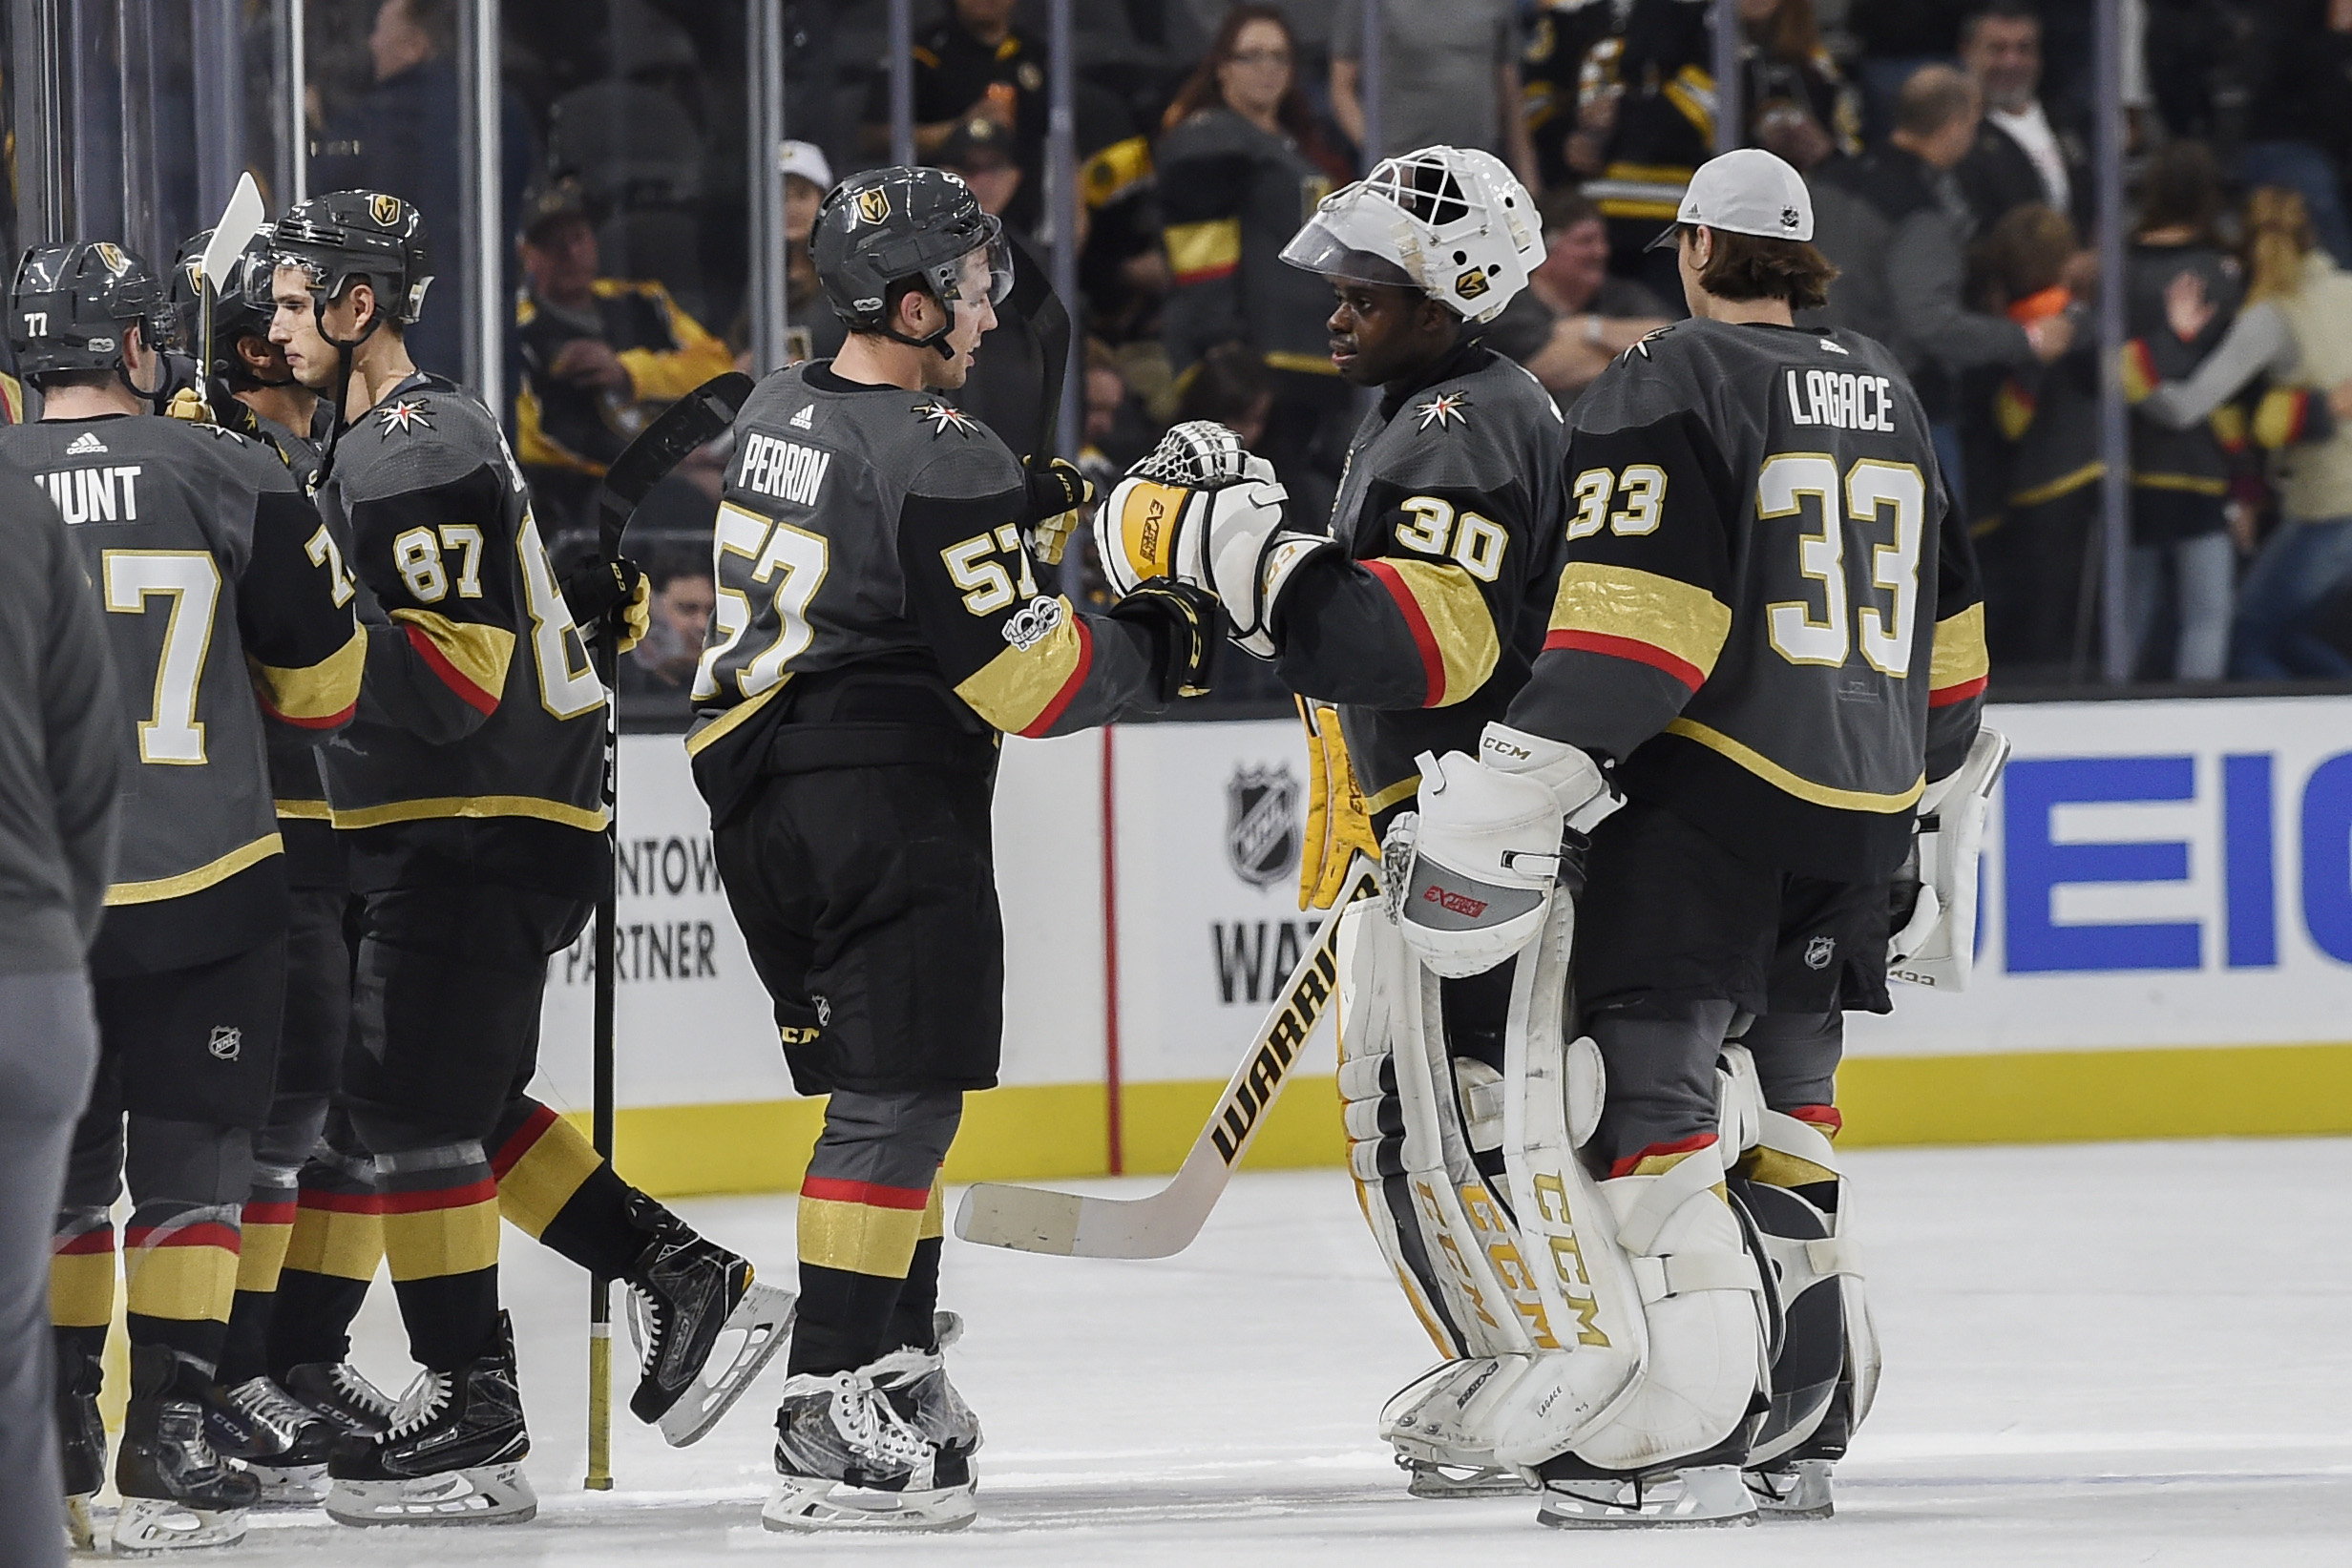 Boston Bruins goalie Malcolm Subban to make NHL debut - Sports Illustrated